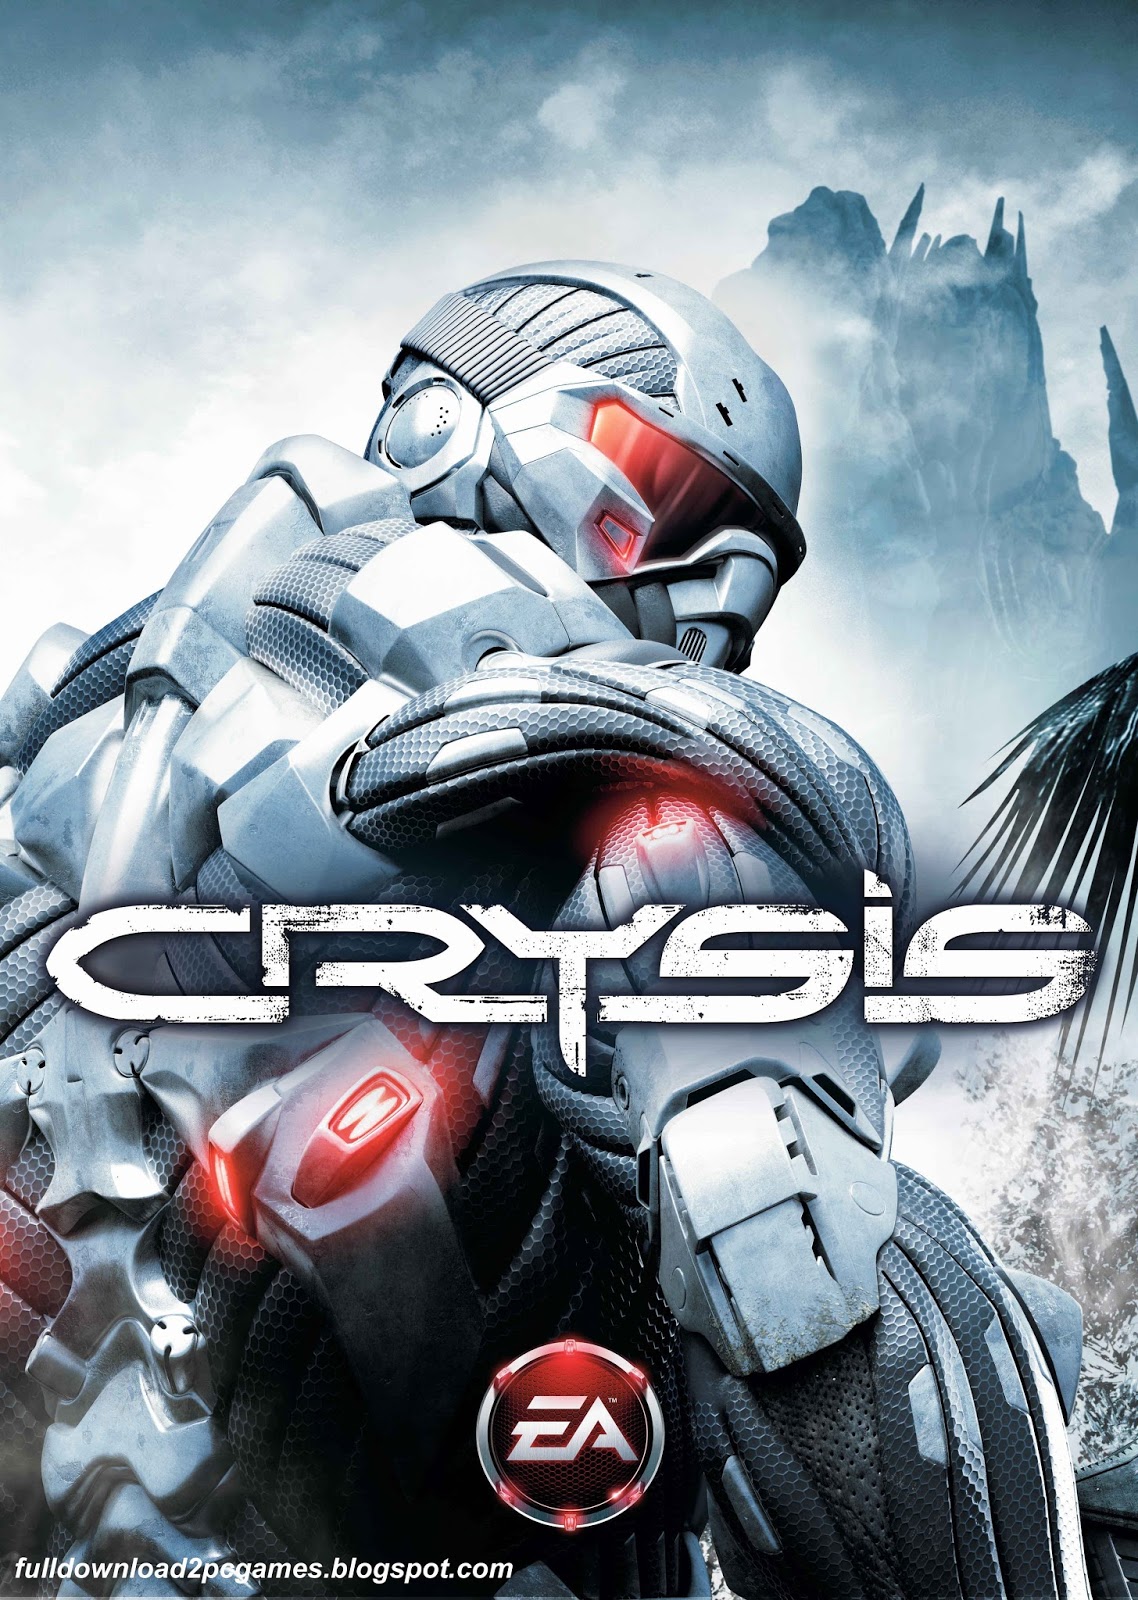 Crysis 1 pc game download highly compressed